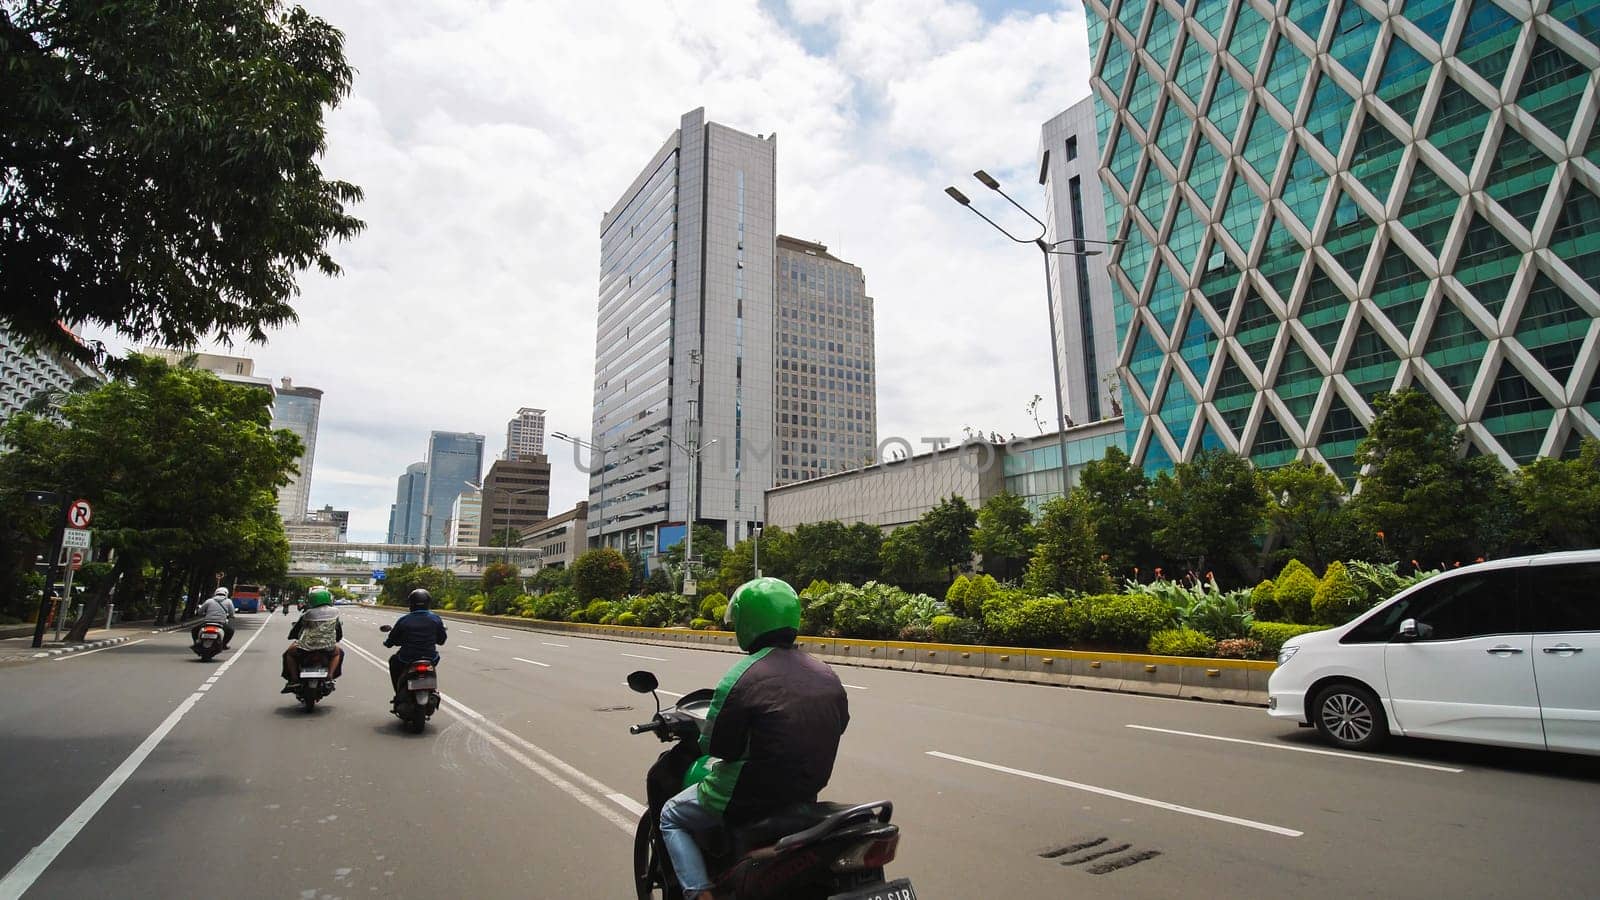 Jakarta's roads and streets with cars during the daytime. by DovidPro